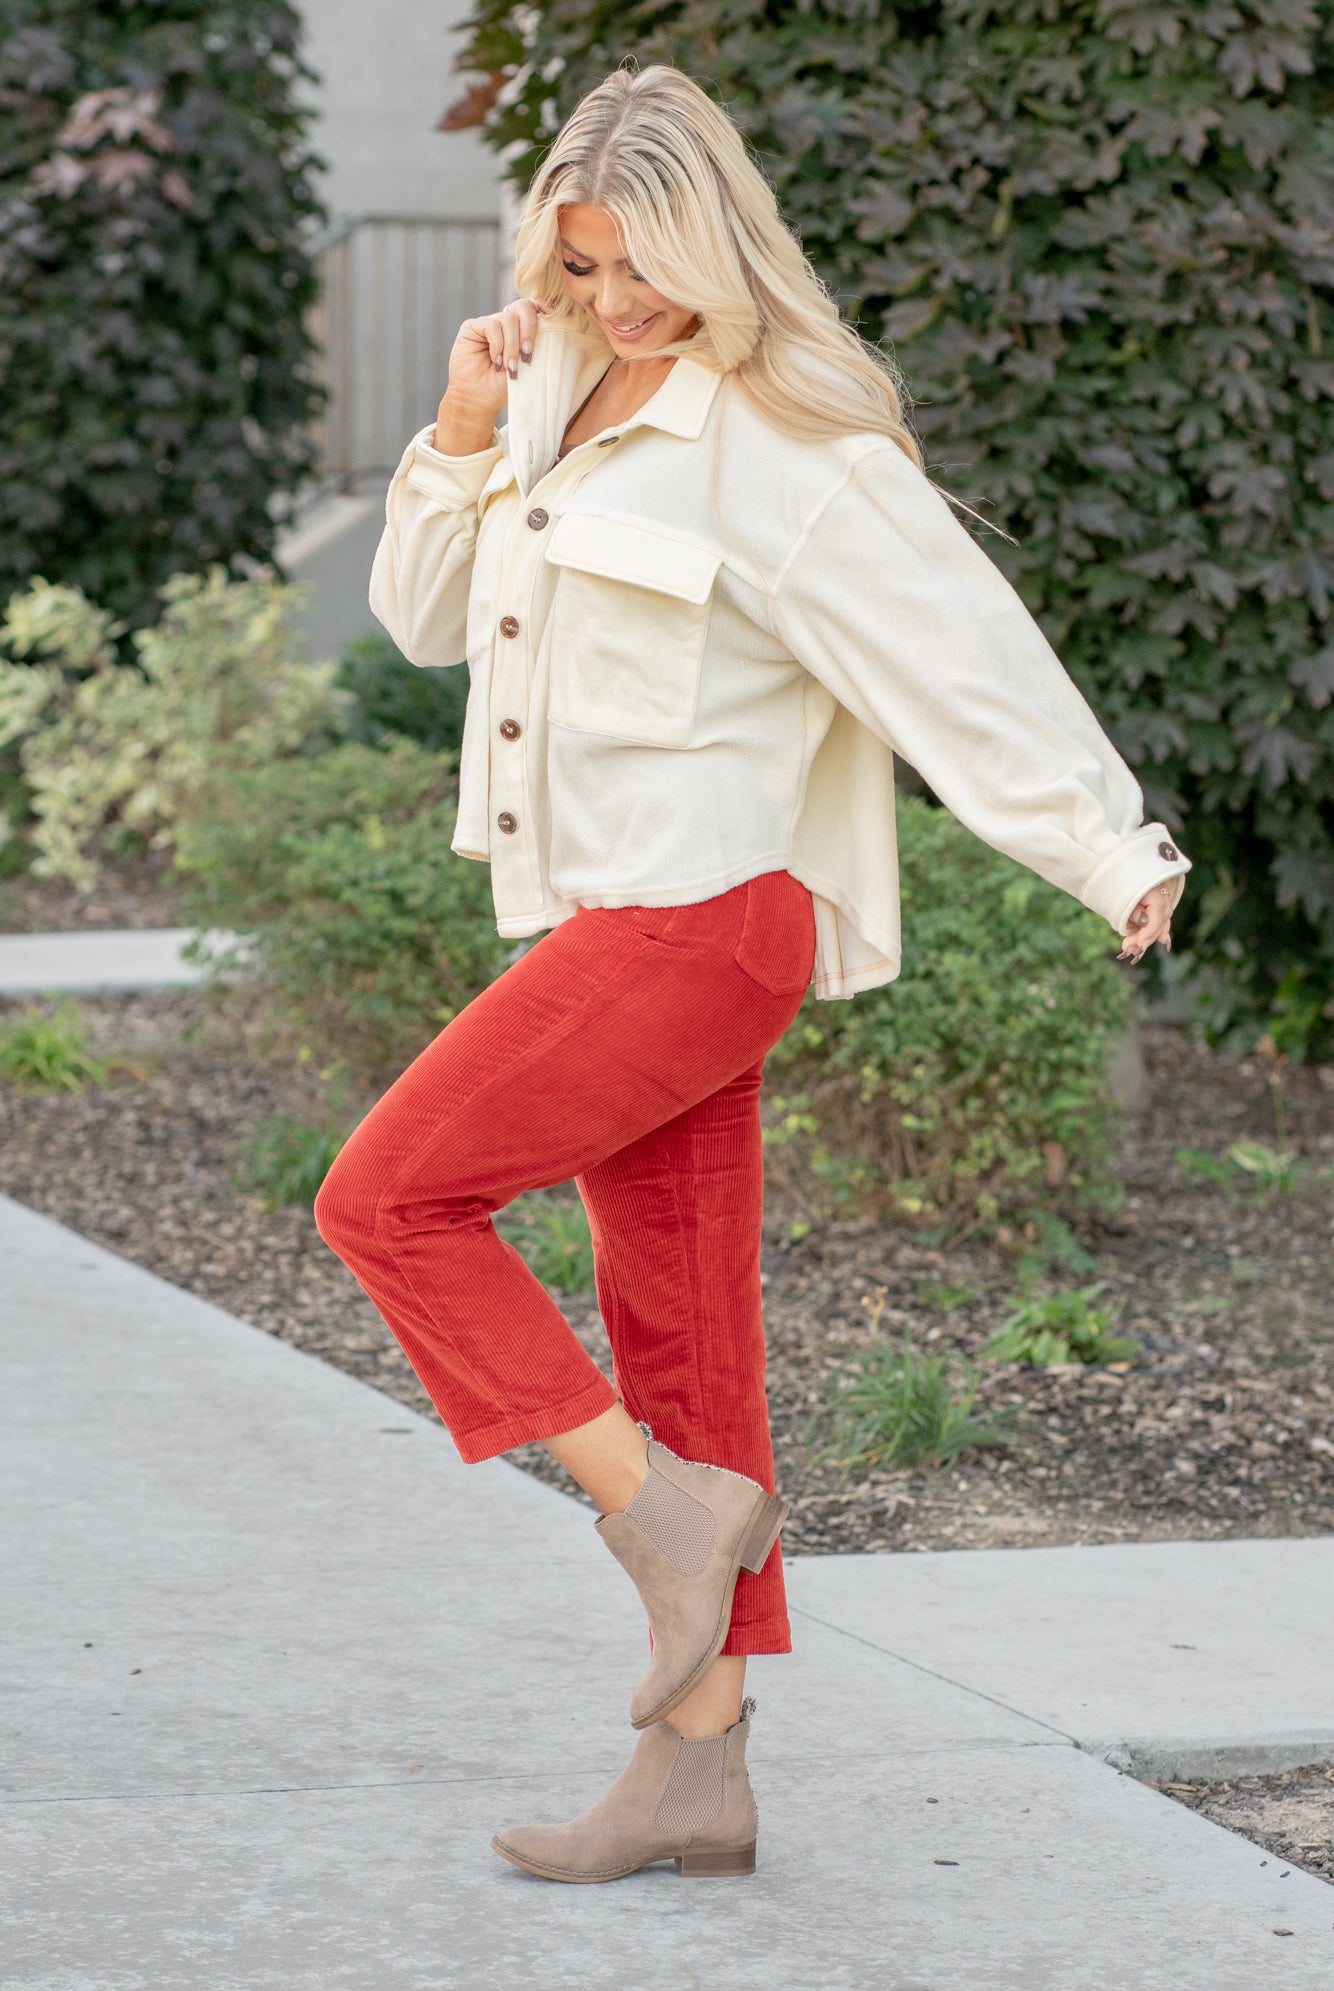 What is fall with shackets? Pair this fleece jacket with a tank and your favorite dad jeans this fall for an updated look this fall.  Color: Cream Neckline: Open, Button Up  Sleeve: Long Sleeves 100% POLYESTER Style #: HAJ1726 *Measured on the smallest size, measurements may vary by size.  Contact us for any additional measurements or sizing.   Cas is 5'7" and wears a size 25 in jeans, a small in tops, and 8 in shoes. She is wearing a size small in this jacket.